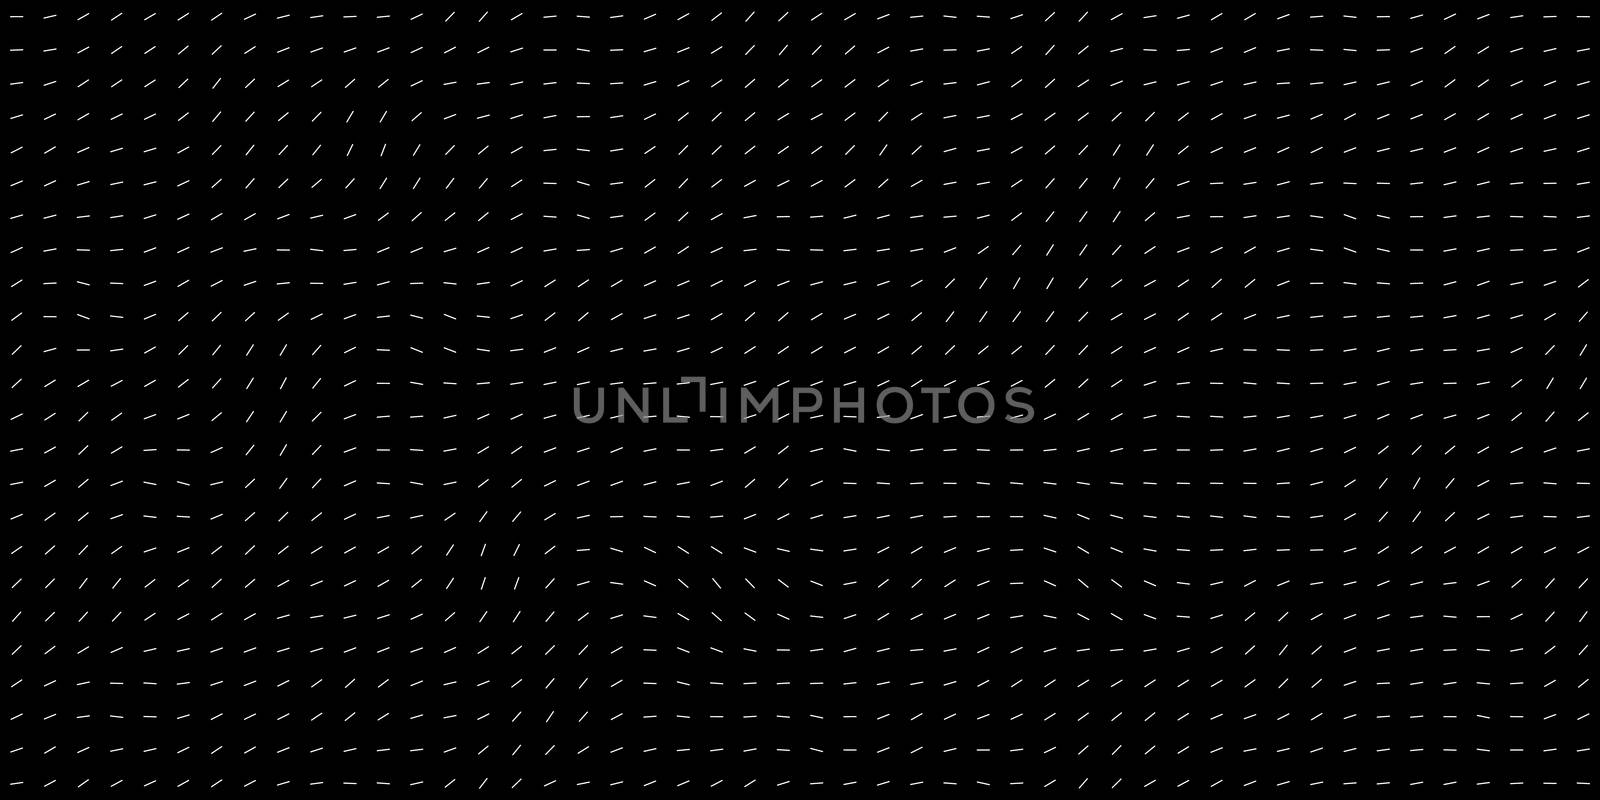 Dynamic Dashes Background. Minimal Motion Texture. by sanches812